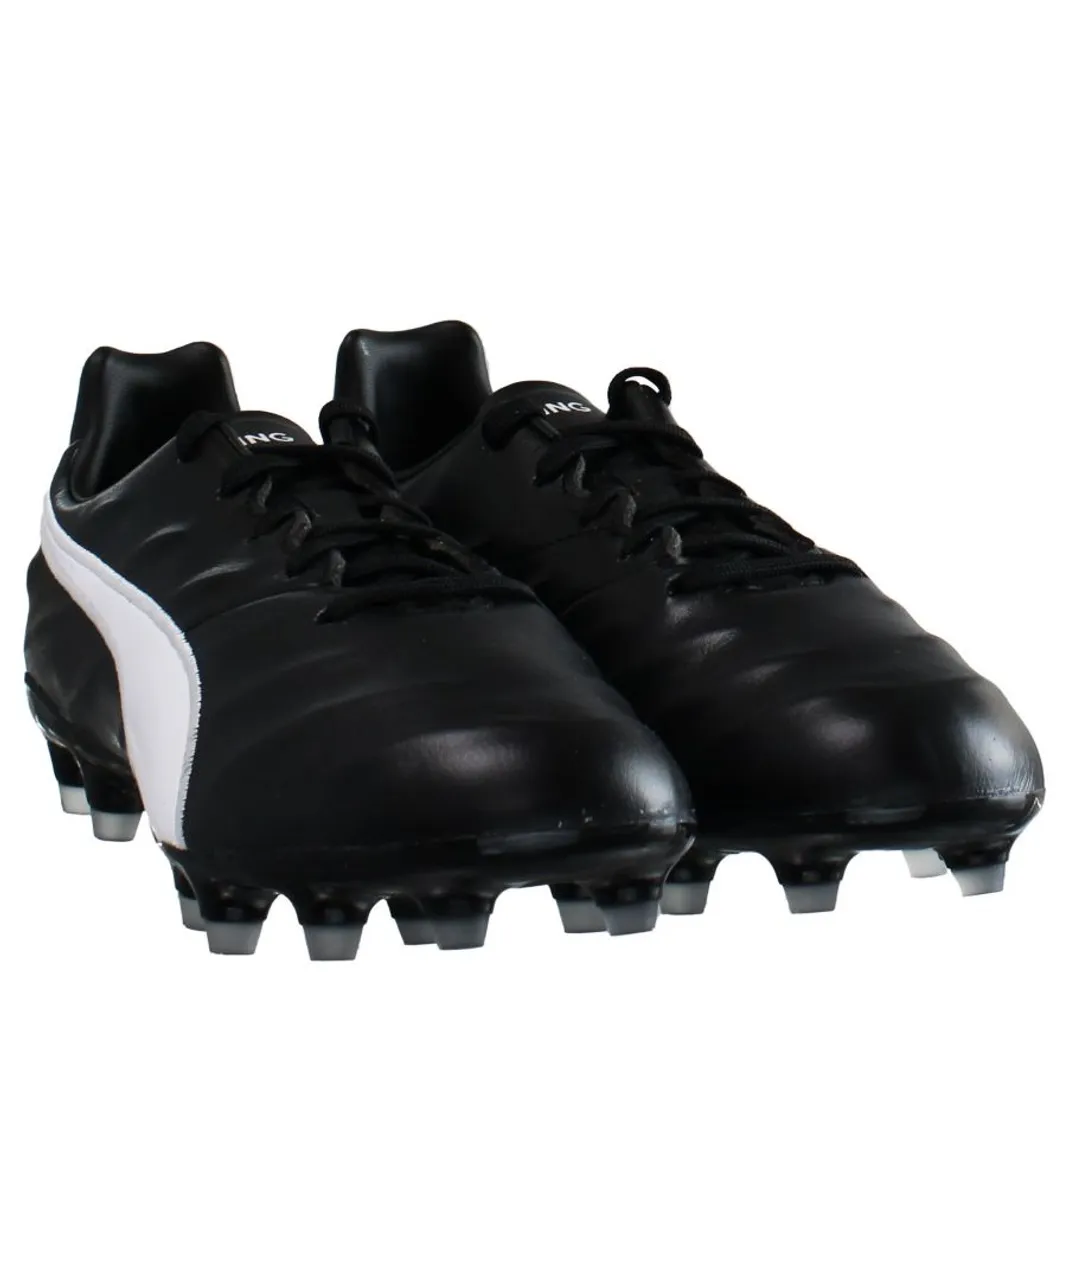 Puma King Pro 21 FG Black Mens Football Boots Leather (archived)